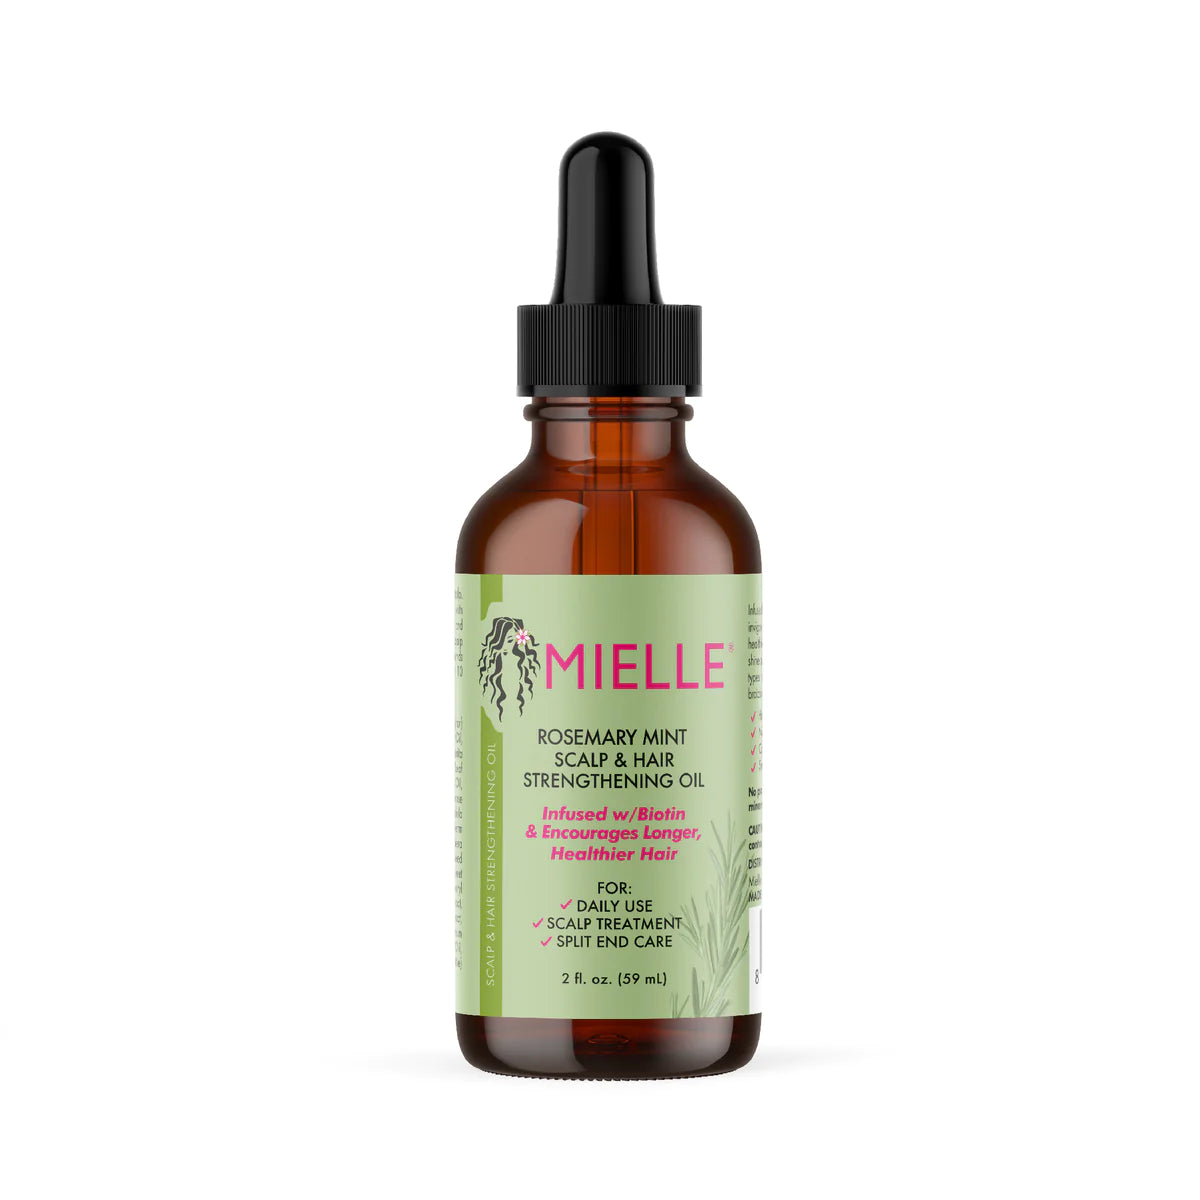 MIELLE rosemary mint scalp & hair stringthening oil infused w/ biotin & encourages growth